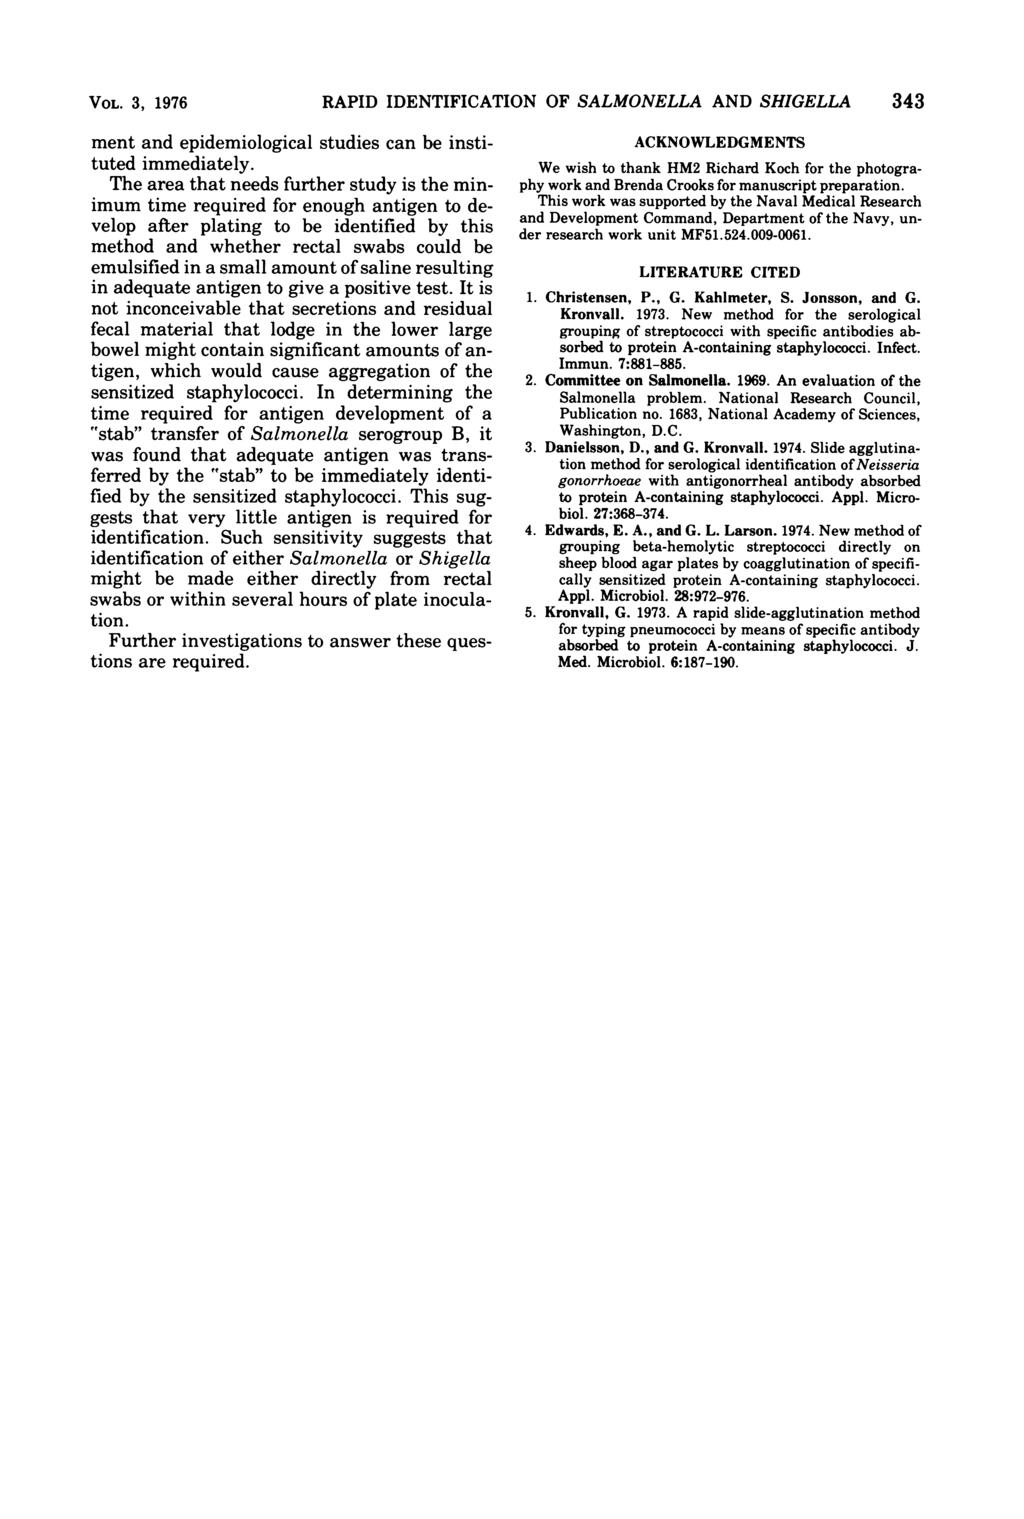 VOL. 3, 1976 RAPID IDENTIFICATION OF SALMONELLA AND SHIGELLA 343 ment and epidemiological studies can be instituted immediately.